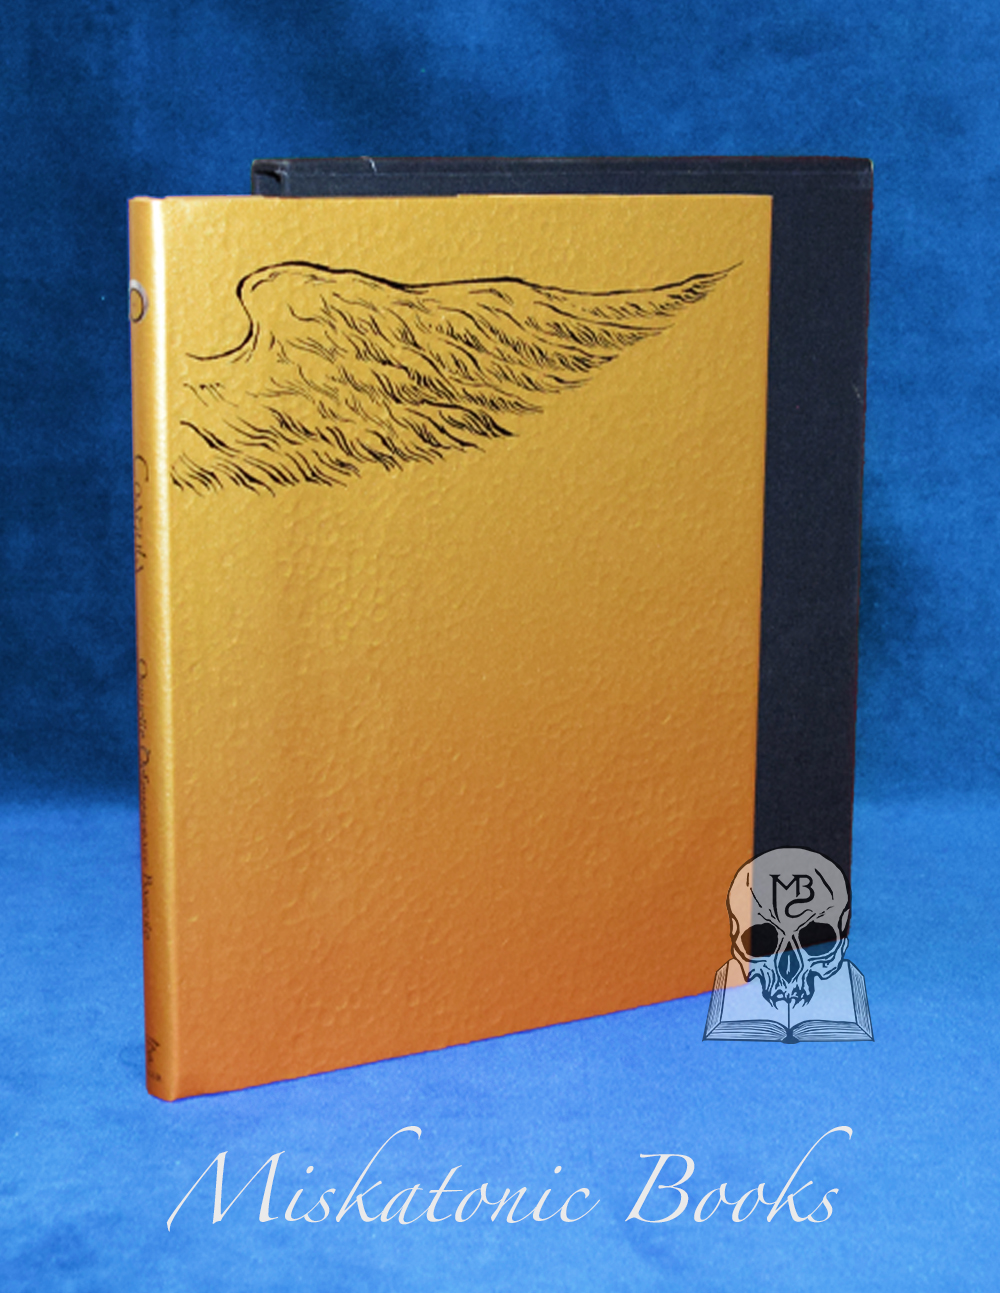 COAGULA: A Gaphic Grimoire by Orryelle Defenestrate-Bascule - Deluxe Quarter Bound in Leather and Custom Slipcase